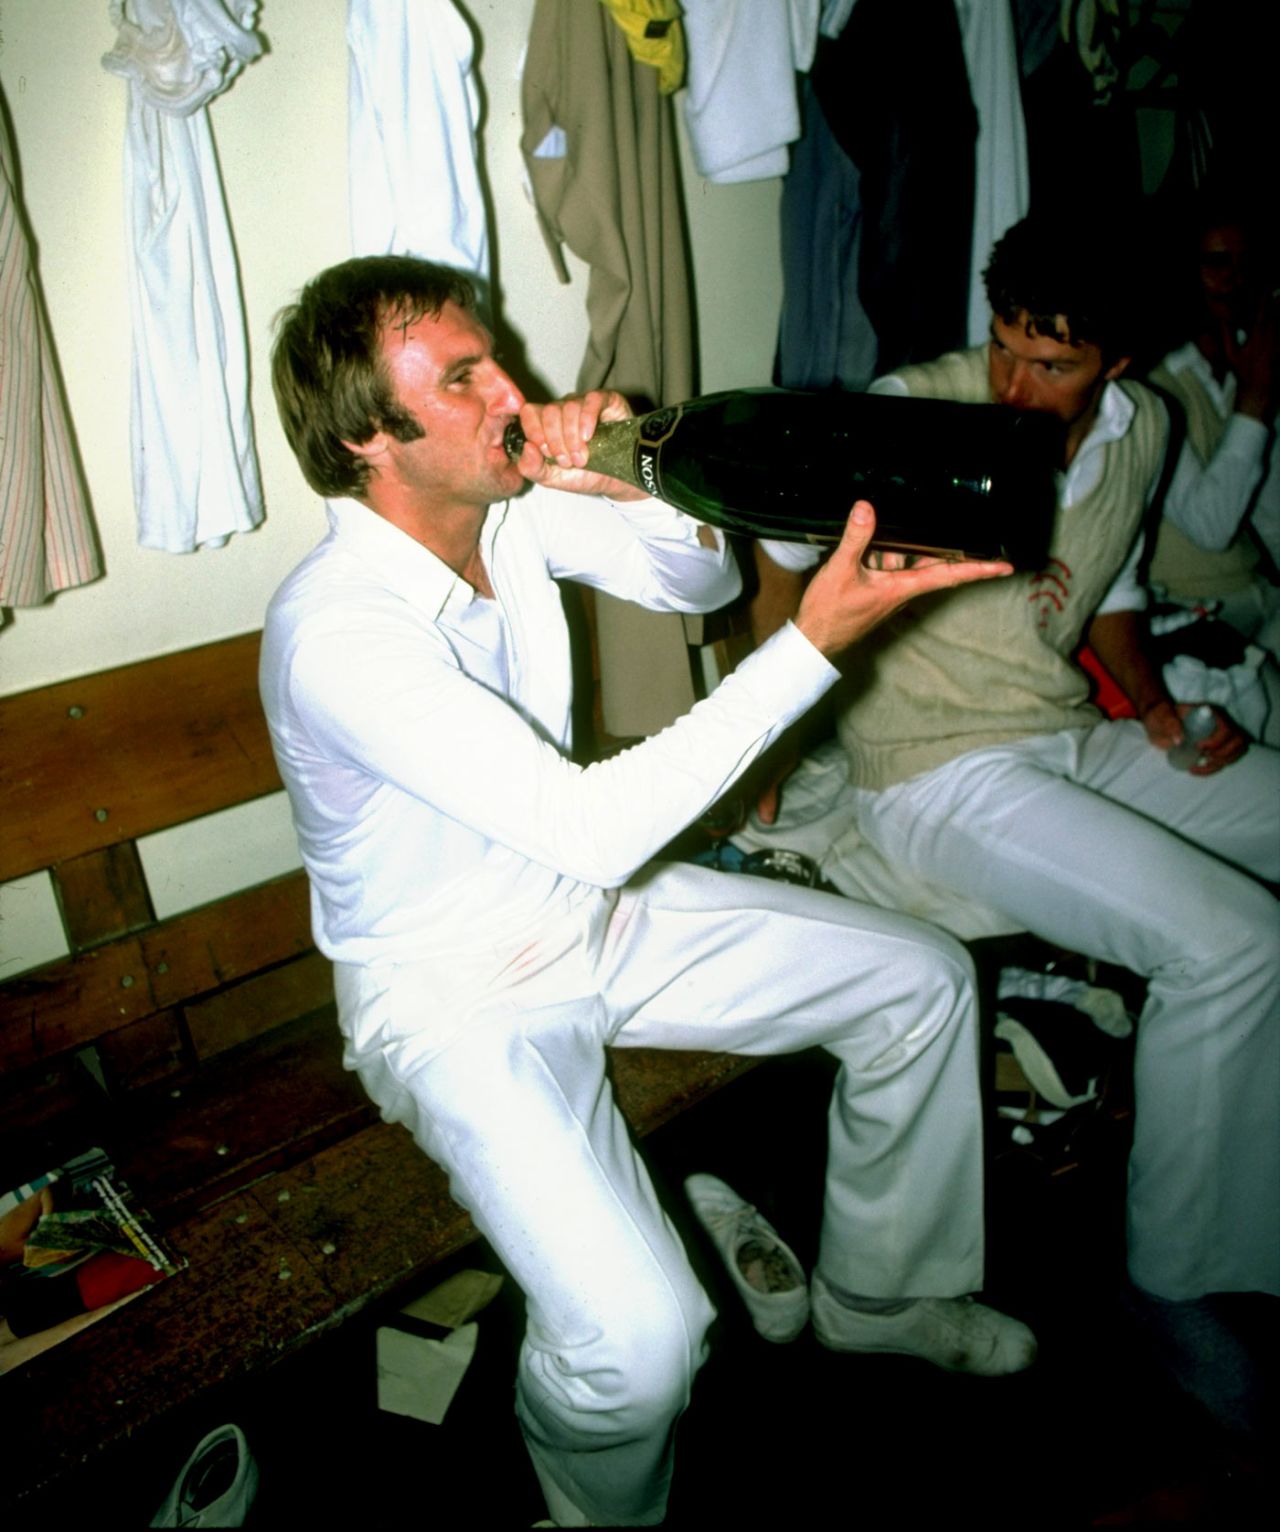 John Lever relaxes in the dressing room, 1980